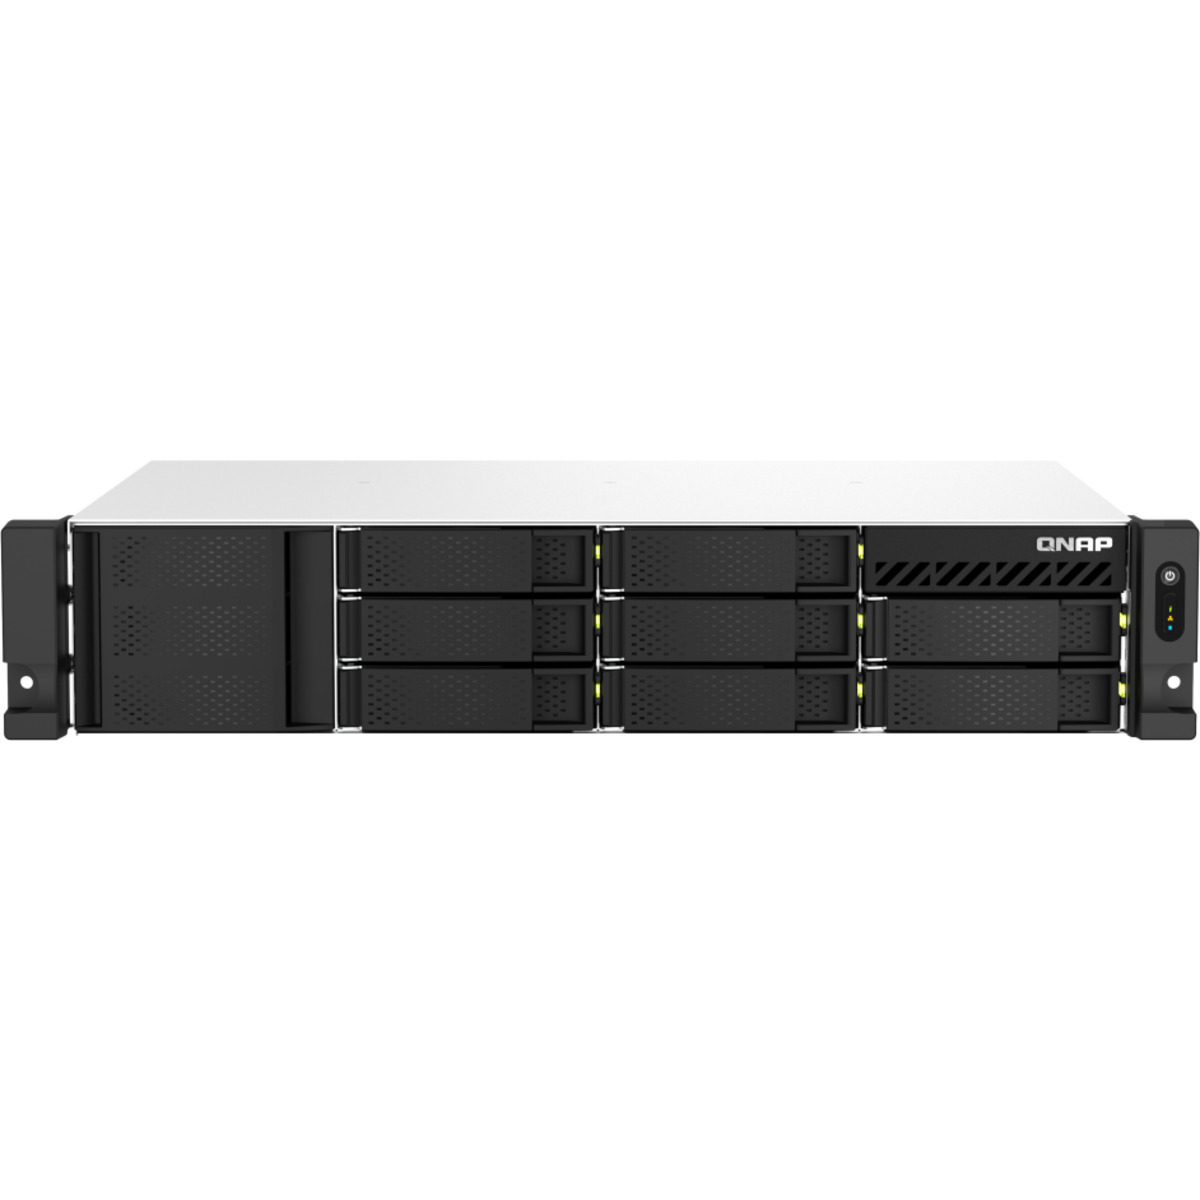 QNAP TS-873AeU-RP 28tb 8-Bay RackMount Multimedia / Power User / Business NAS - Network Attached Storage Device 7x4tb Seagate IronWolf Pro ST4000NT001 3.5 7200rpm SATA 6Gb/s HDD NAS Class Drives Installed - Burn-In Tested - FREE RAM UPGRADE TS-873AeU-RP